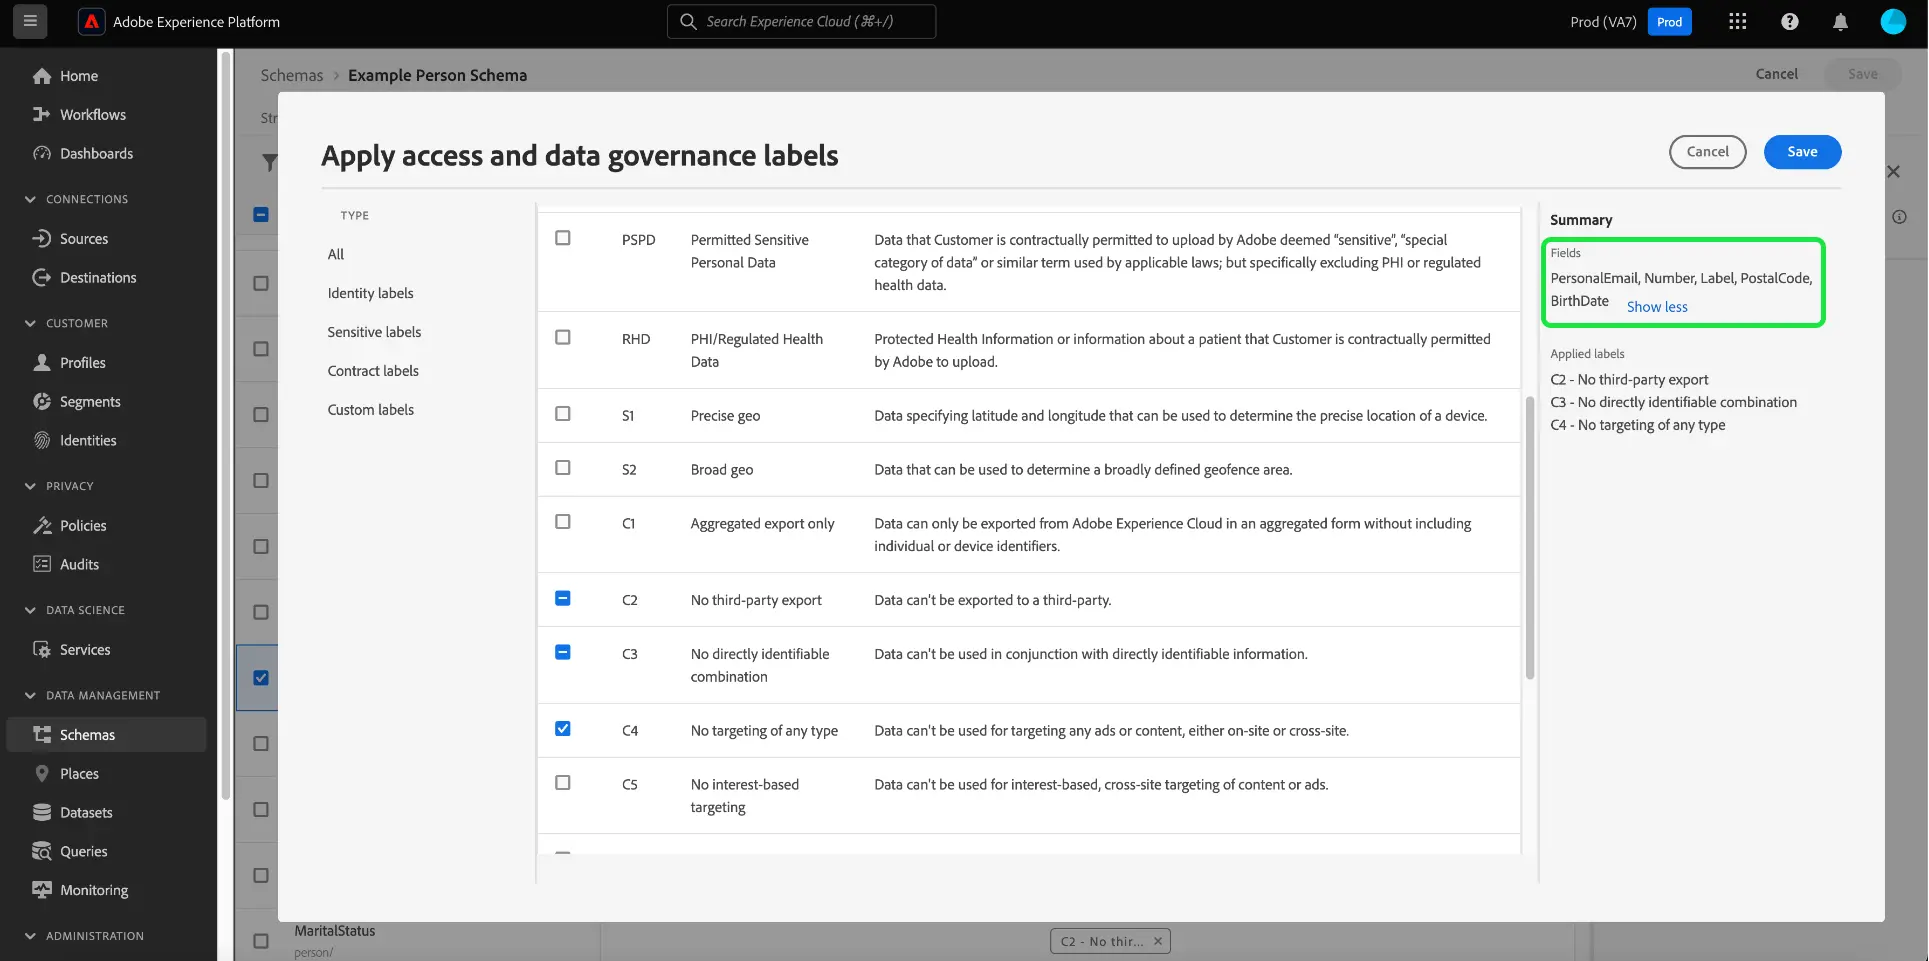 The Apply Access and Data Governance Labels dialog with the selected fields highlighted.